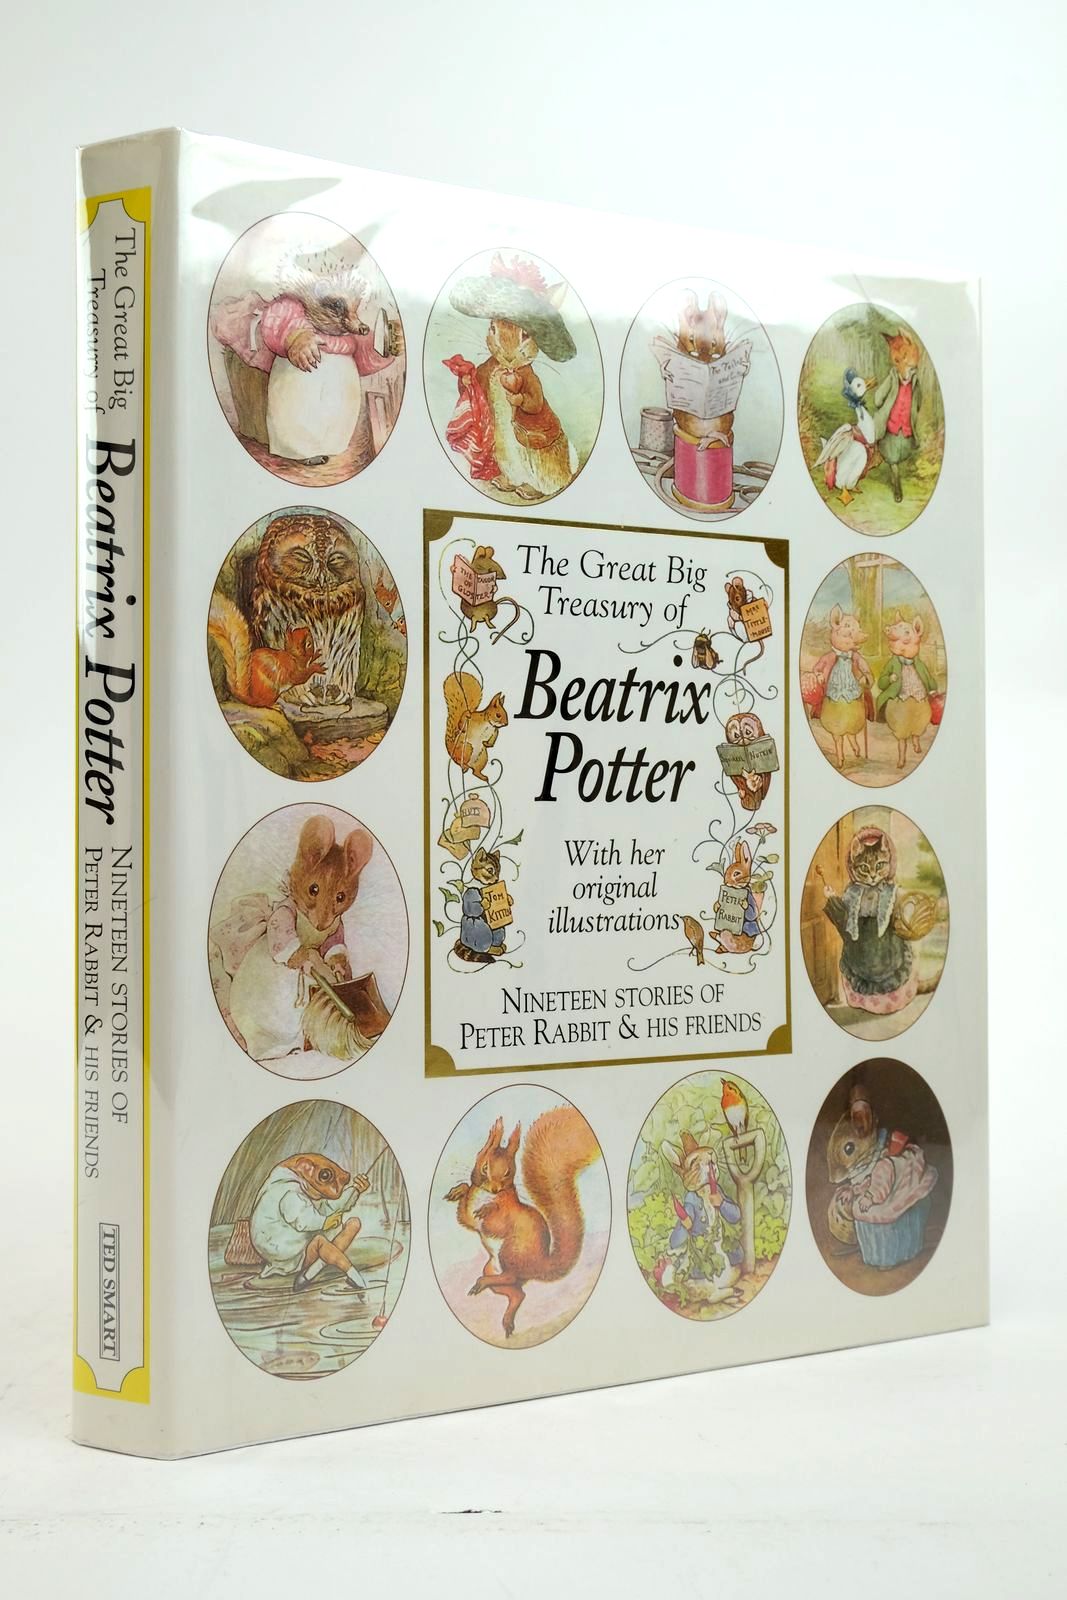 Photo of THE GREAT BIG TREASURY OF BEATRIX POTTER written by Potter, Beatrix illustrated by Potter, Beatrix published by Ted Smart (STOCK CODE: 2139247)  for sale by Stella & Rose's Books